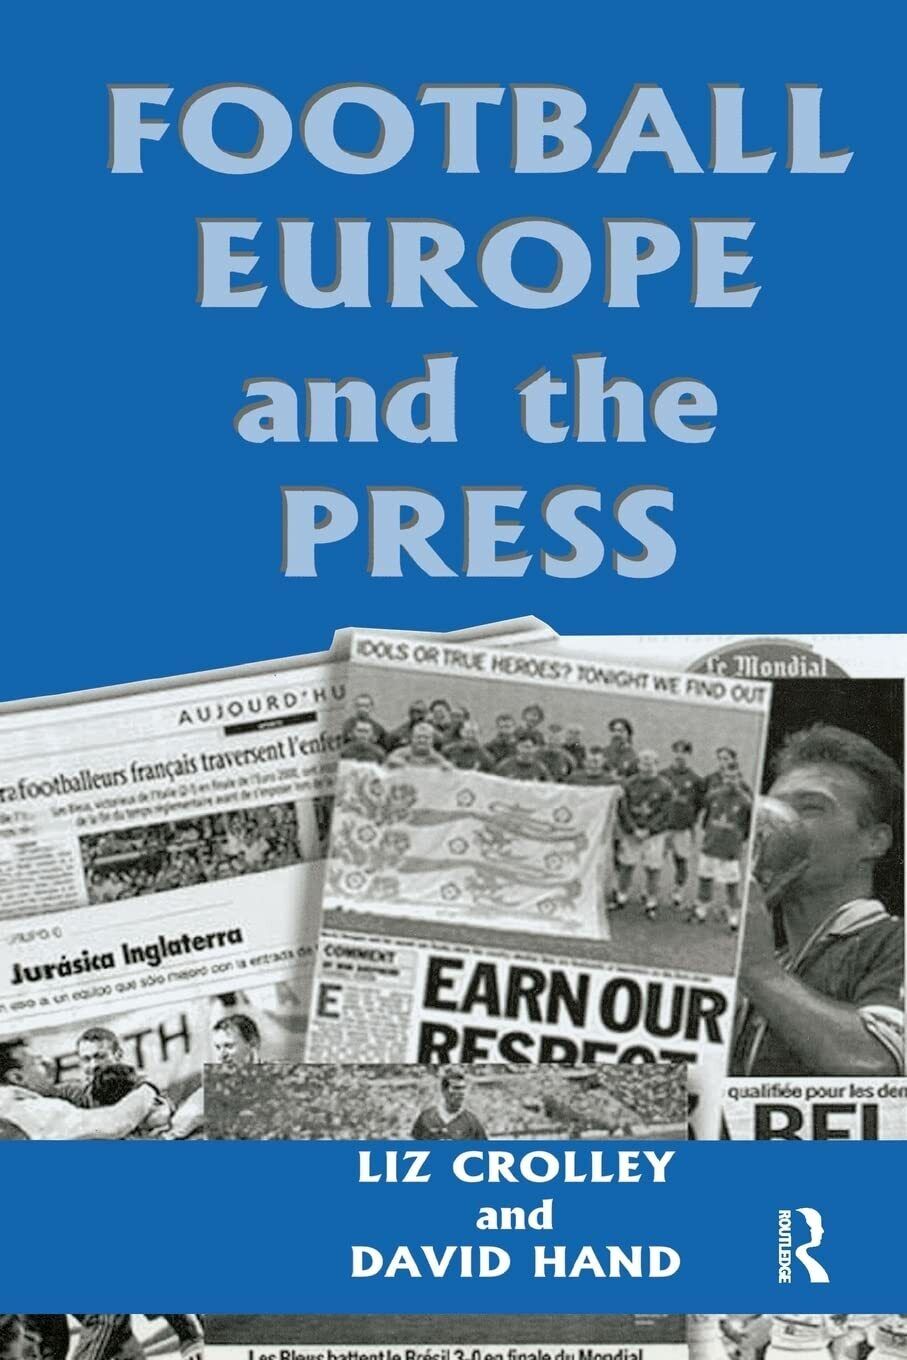 Football, Europe and the Press - Liz Crolley - Routledge, 2002 libro usato